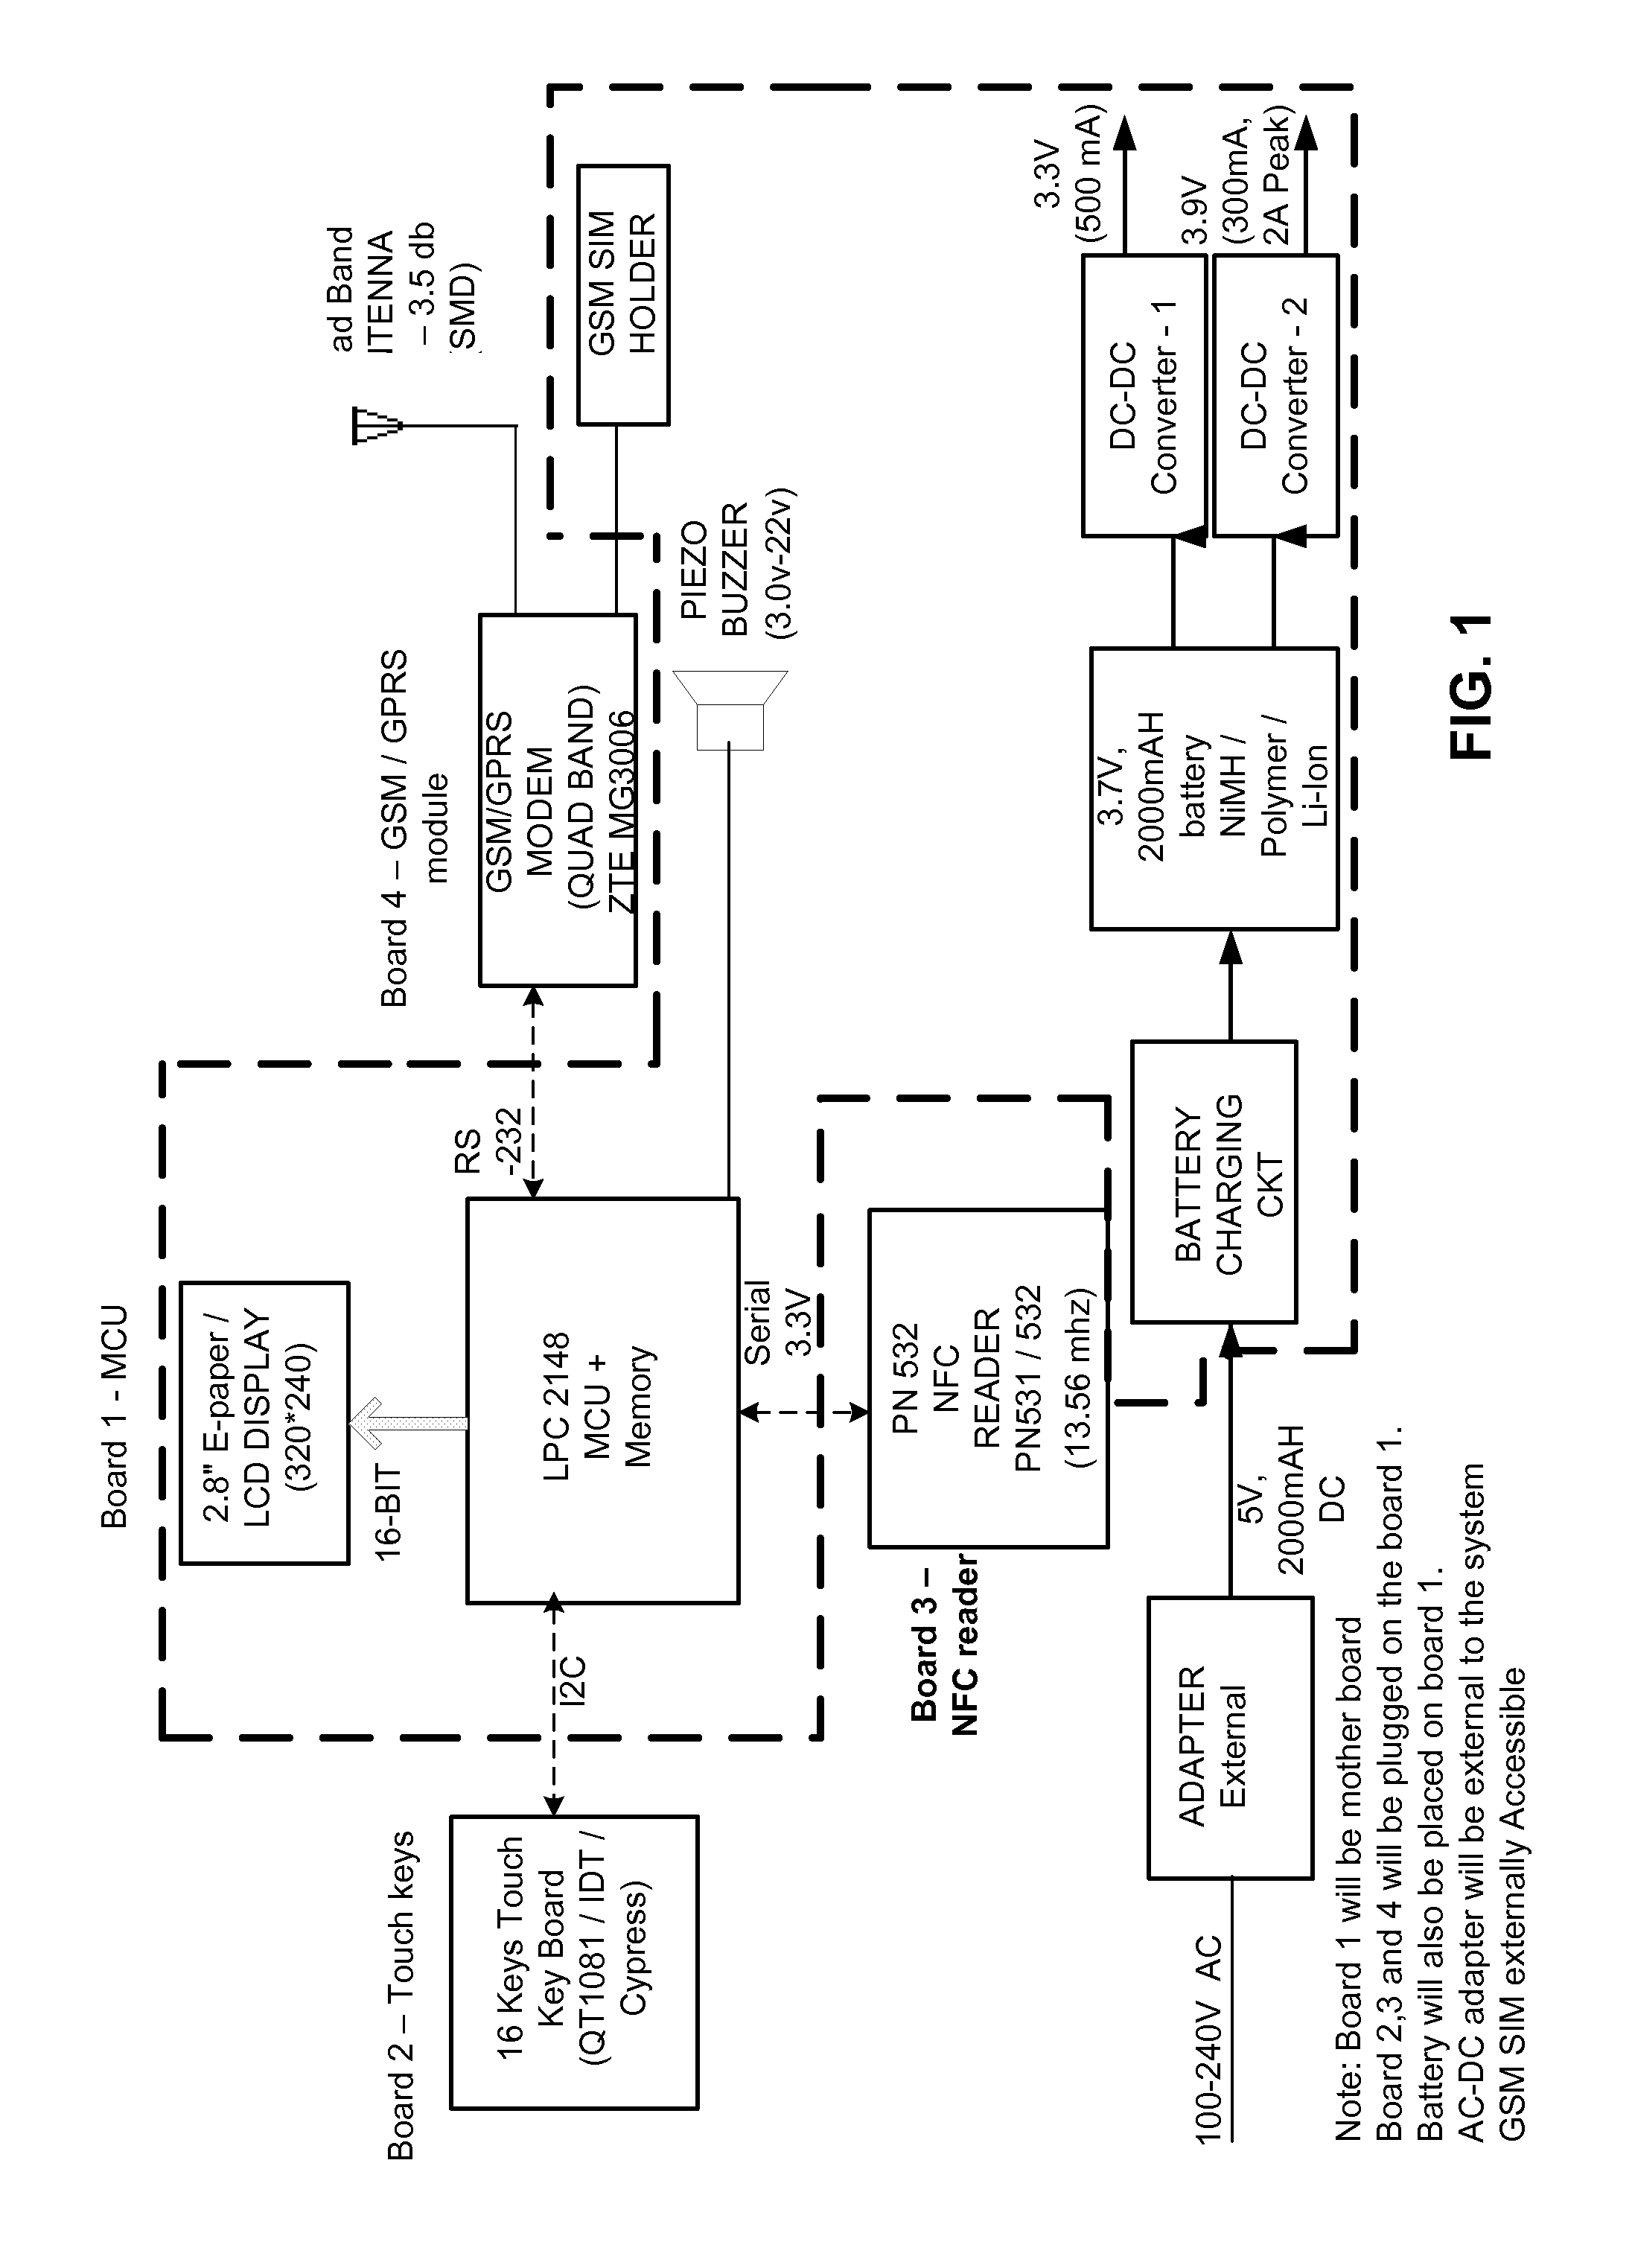 Integrated system and method for enabling mobile commerce transactions using active posters and contactless identity modules